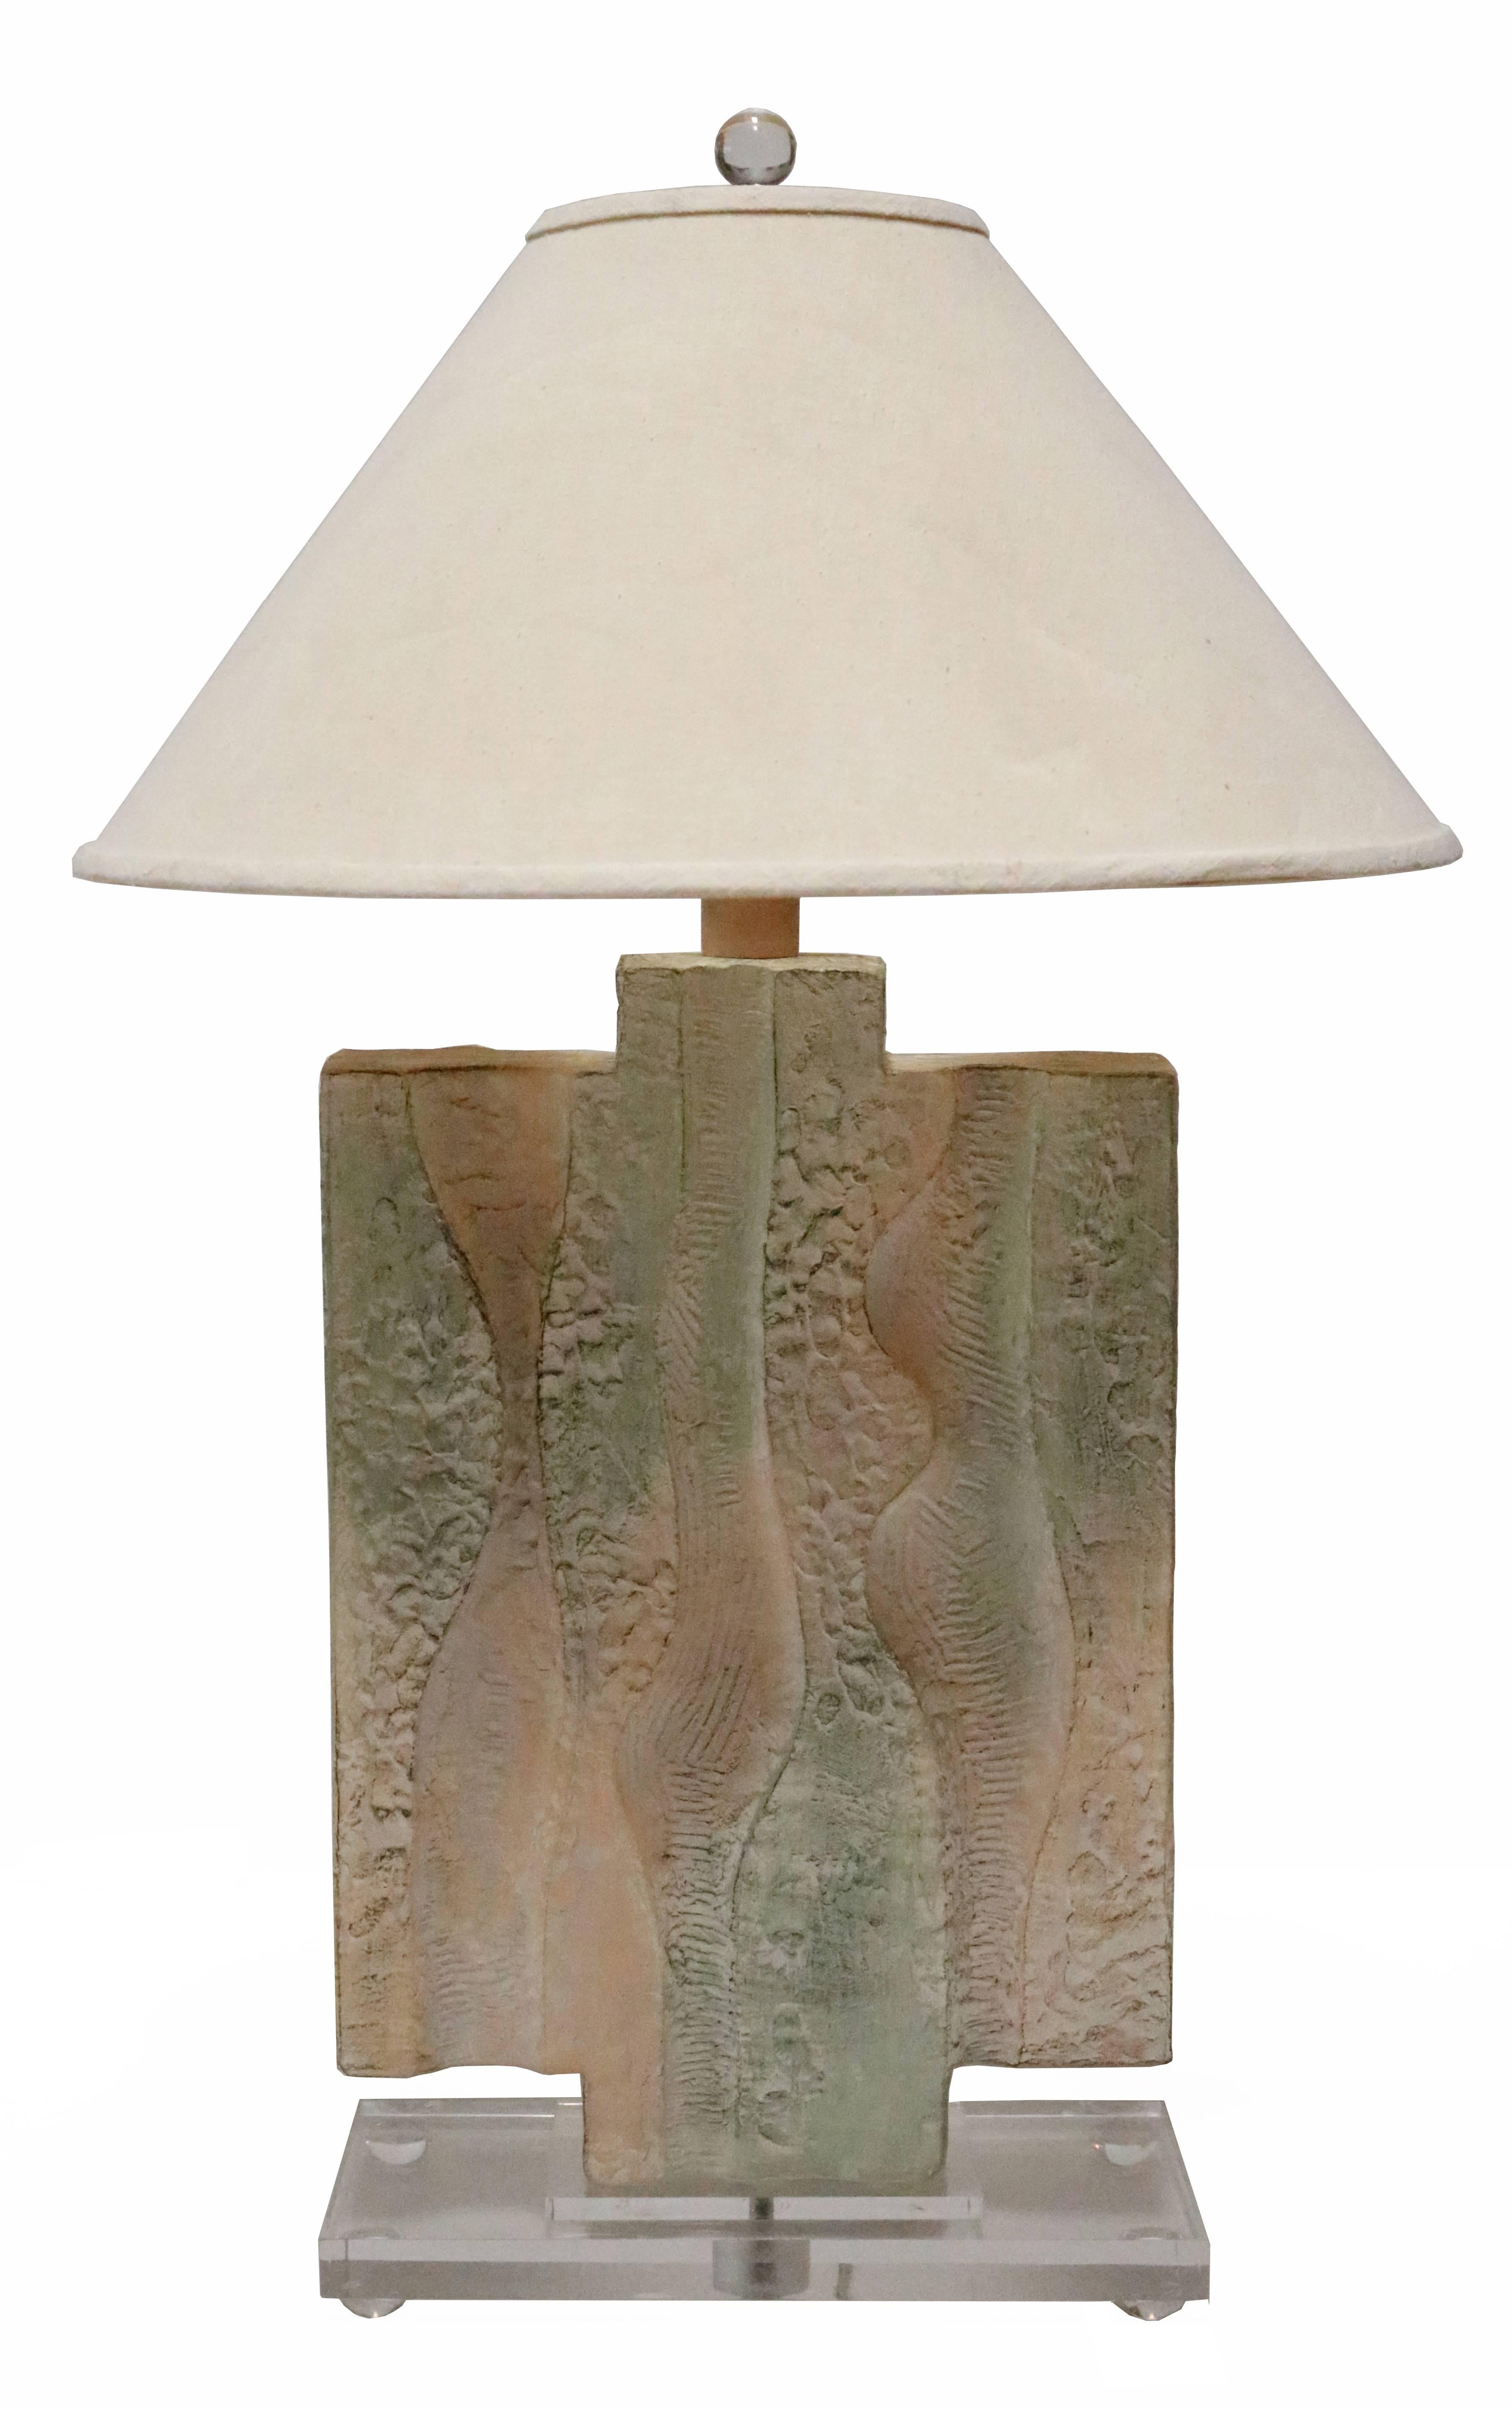 Pair of 1980s ceramic table lamps with an artful, textured finish and pastel tones. Each sits on a Lucite base
and has it's original canvas shade.
 